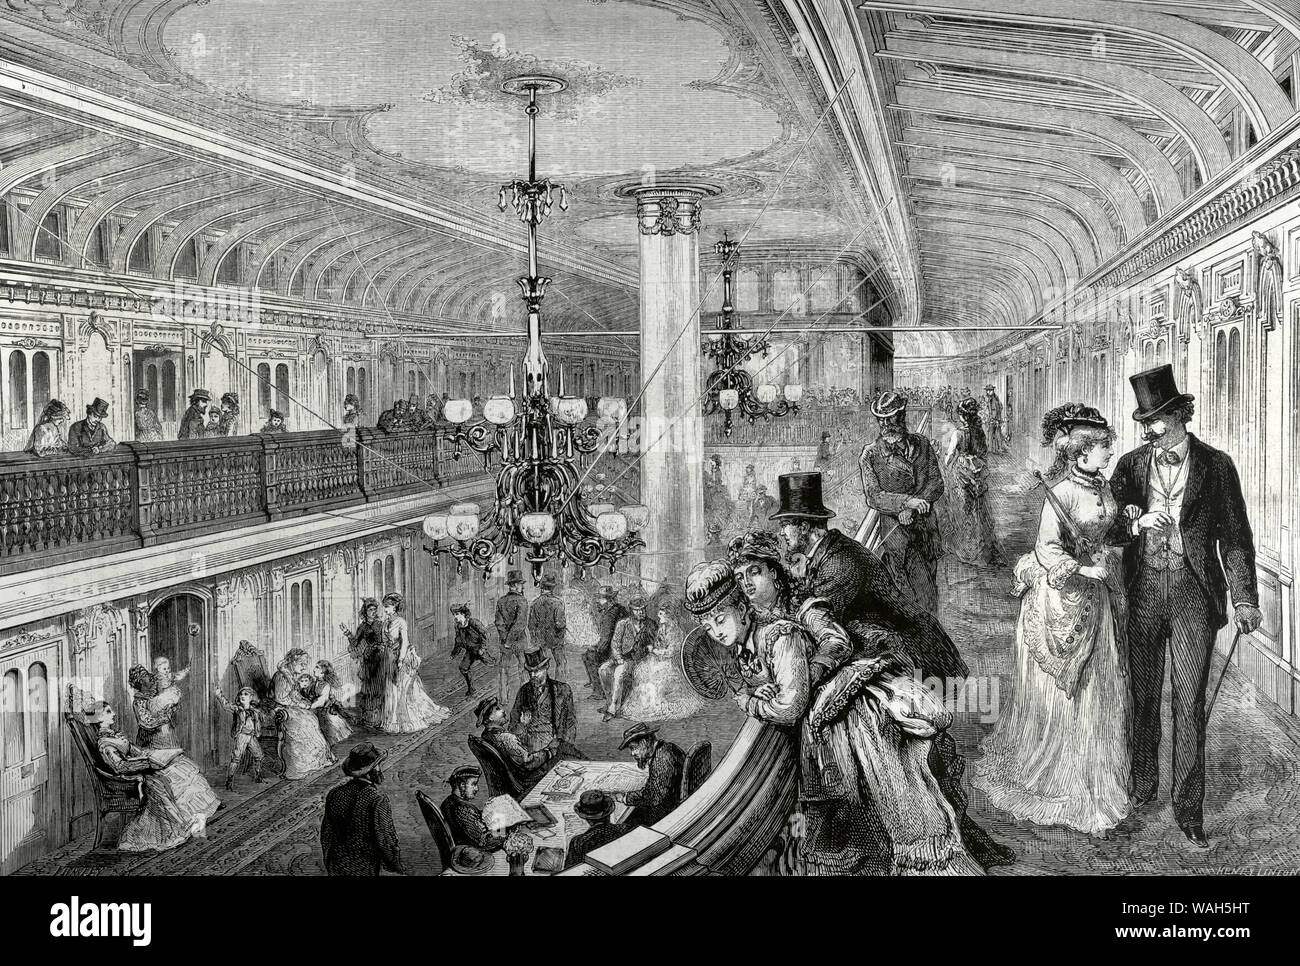 United States of America. "Fall River LIne". Steam boat combination and connection with railroad between New York and Boston, which was operational from 1847 to 1937. Interior of the luxurious main hall of one of the ships of the river fleet, the steamship "Bristol". Engraving. La Ilustracion Española y Americana, April 22, 1876. Stock Photo